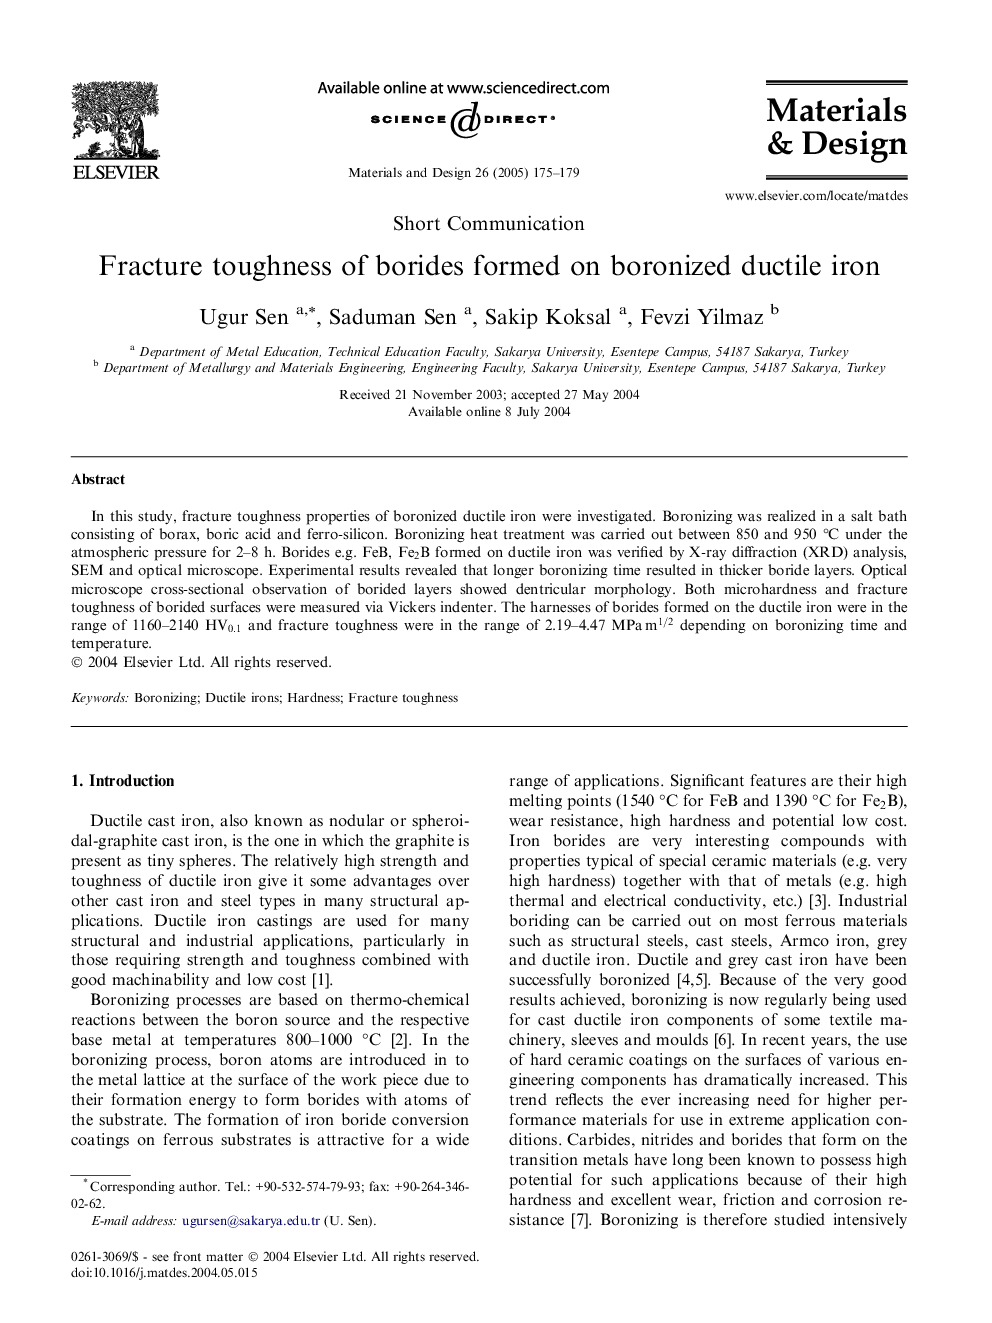 Fracture toughness of borides formed on boronized ductile iron